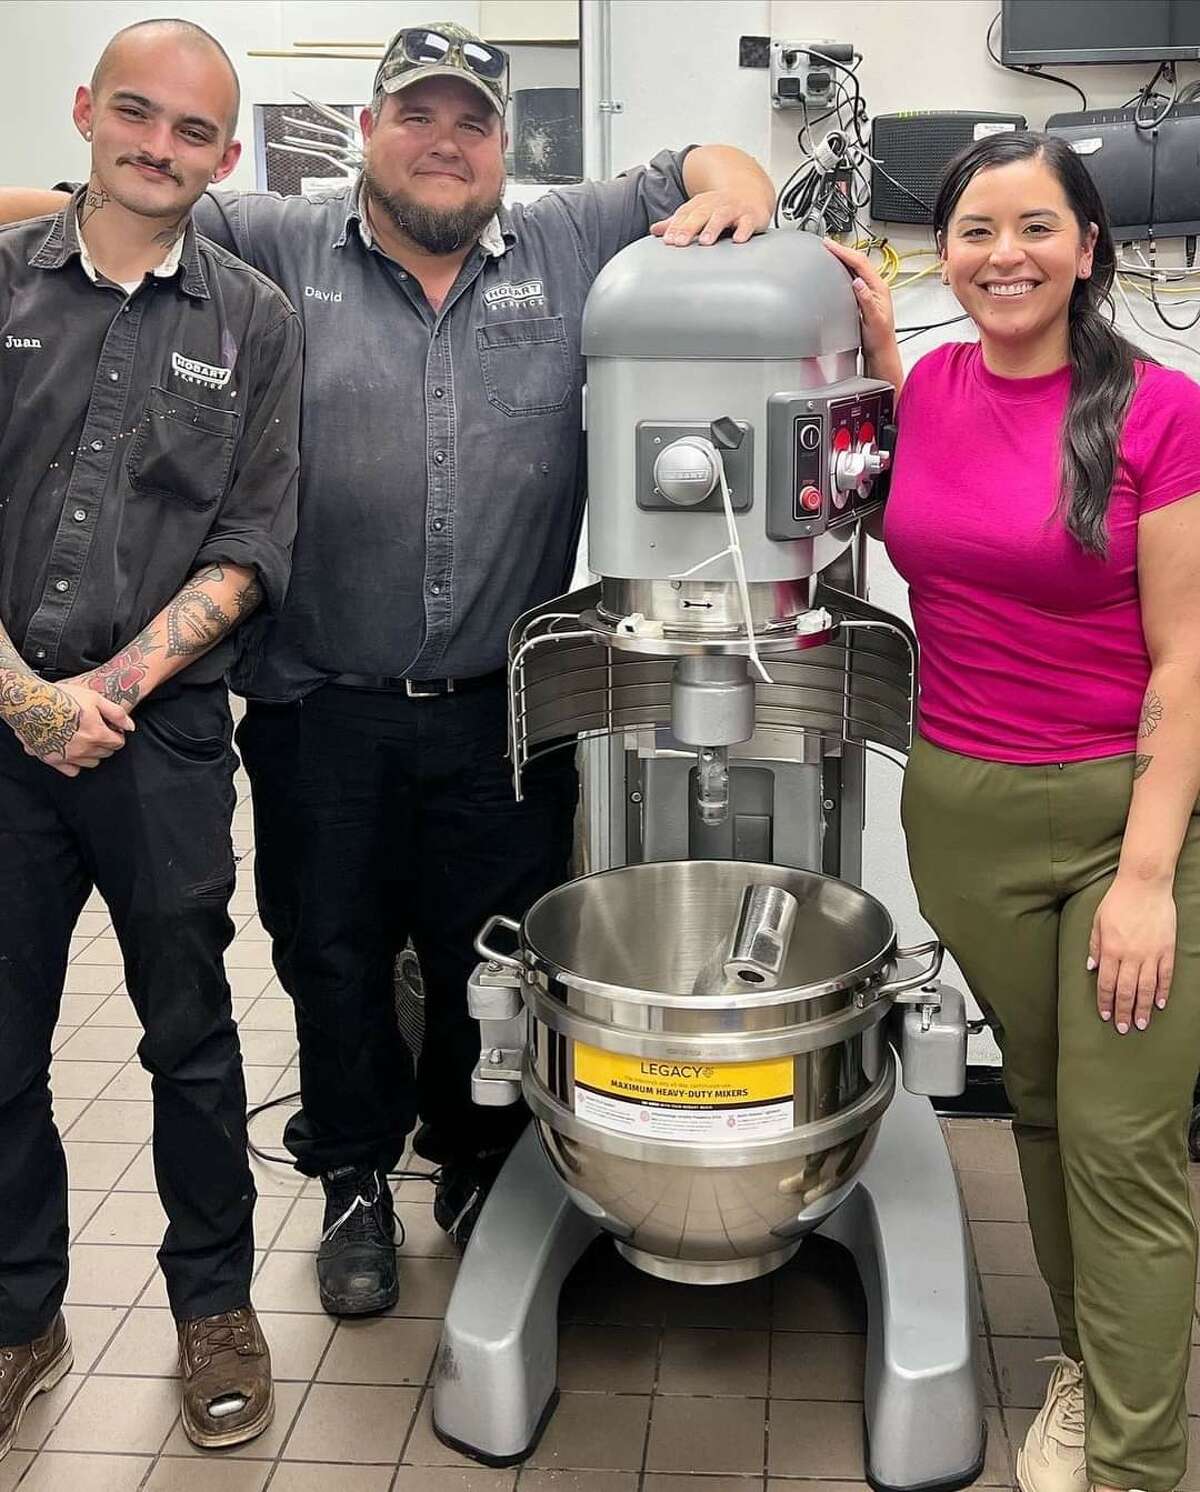 Standing close to her own height, Janet Zapata, who is the owner of 550 Pizzeria, received the kitchen supplier company, Hobart, a large mixer as a gift that she will be able to utilize for her business. The gift is not just unique because of the sheer size of the mixer but also because it allows Zapata to become of the few ambassadors that the kitchen equipment company has in the South Texas region.